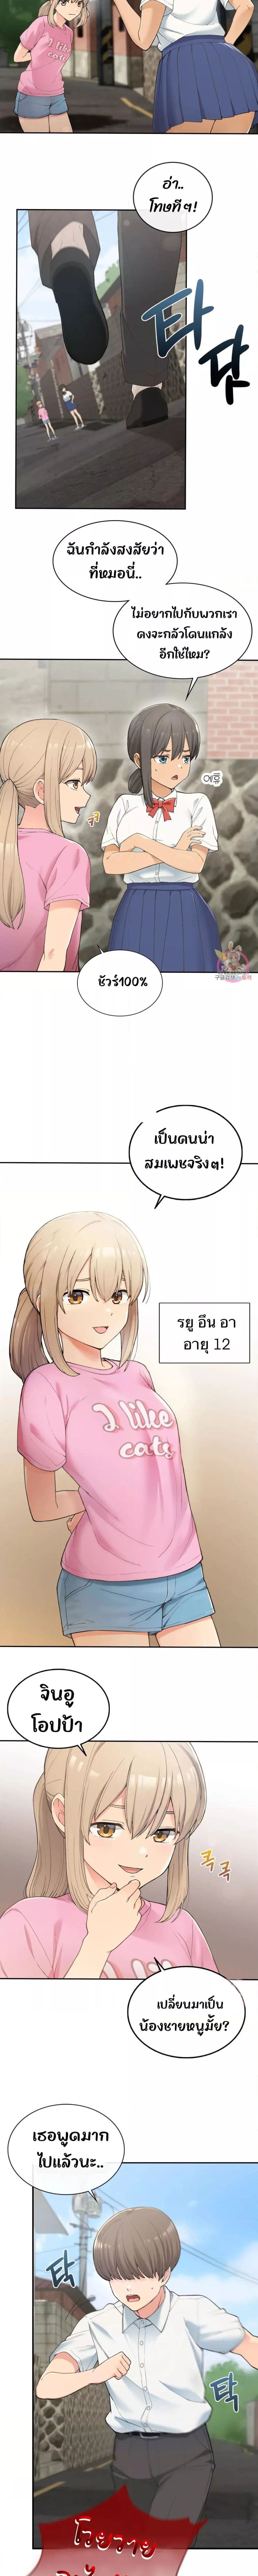 Shall We Live Together in the Country ตอนที่ 1 ภาพ 1